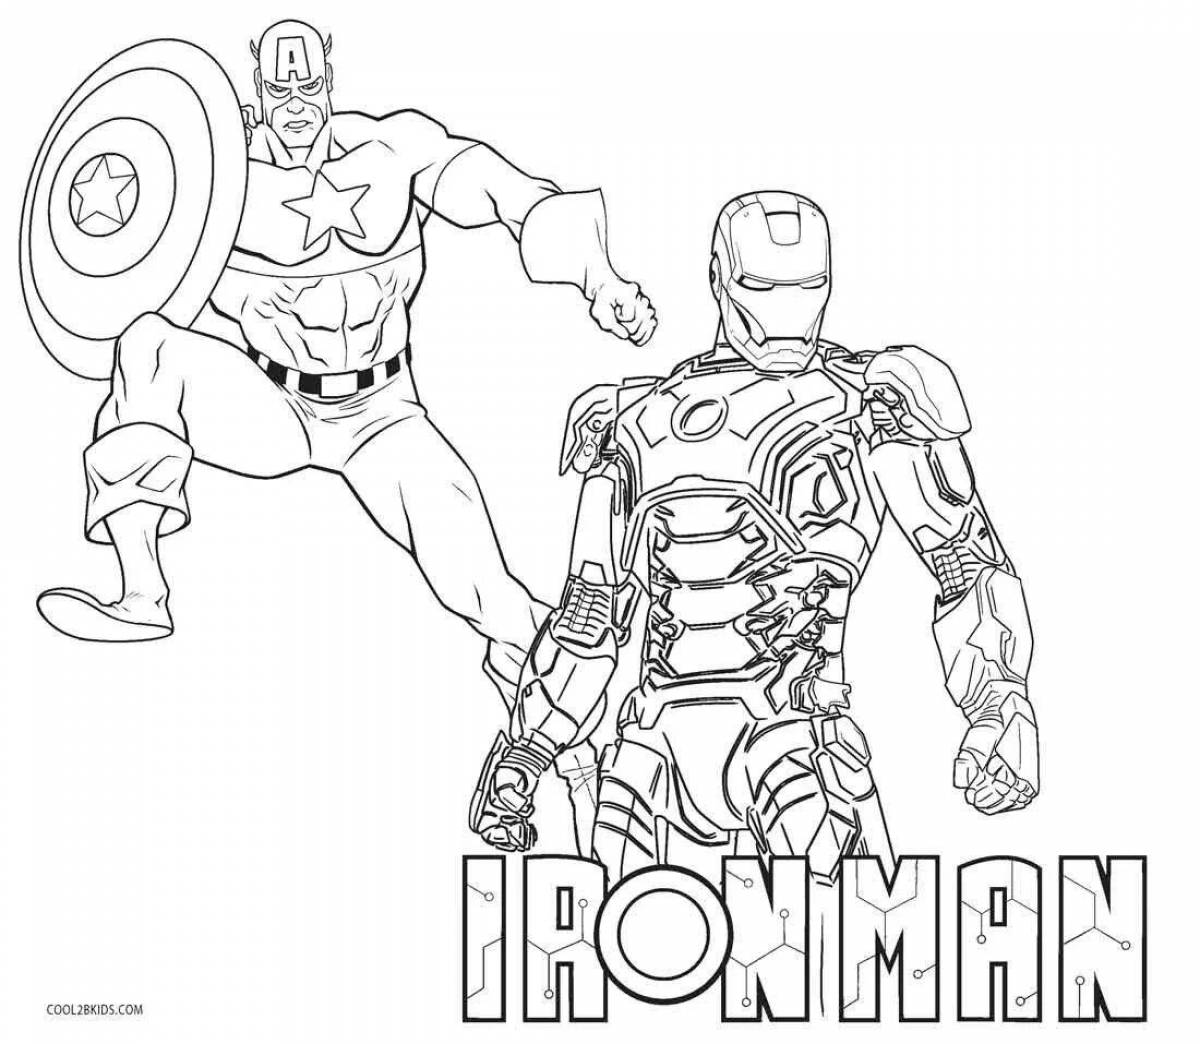 Amazing Hulk and Thor coloring book